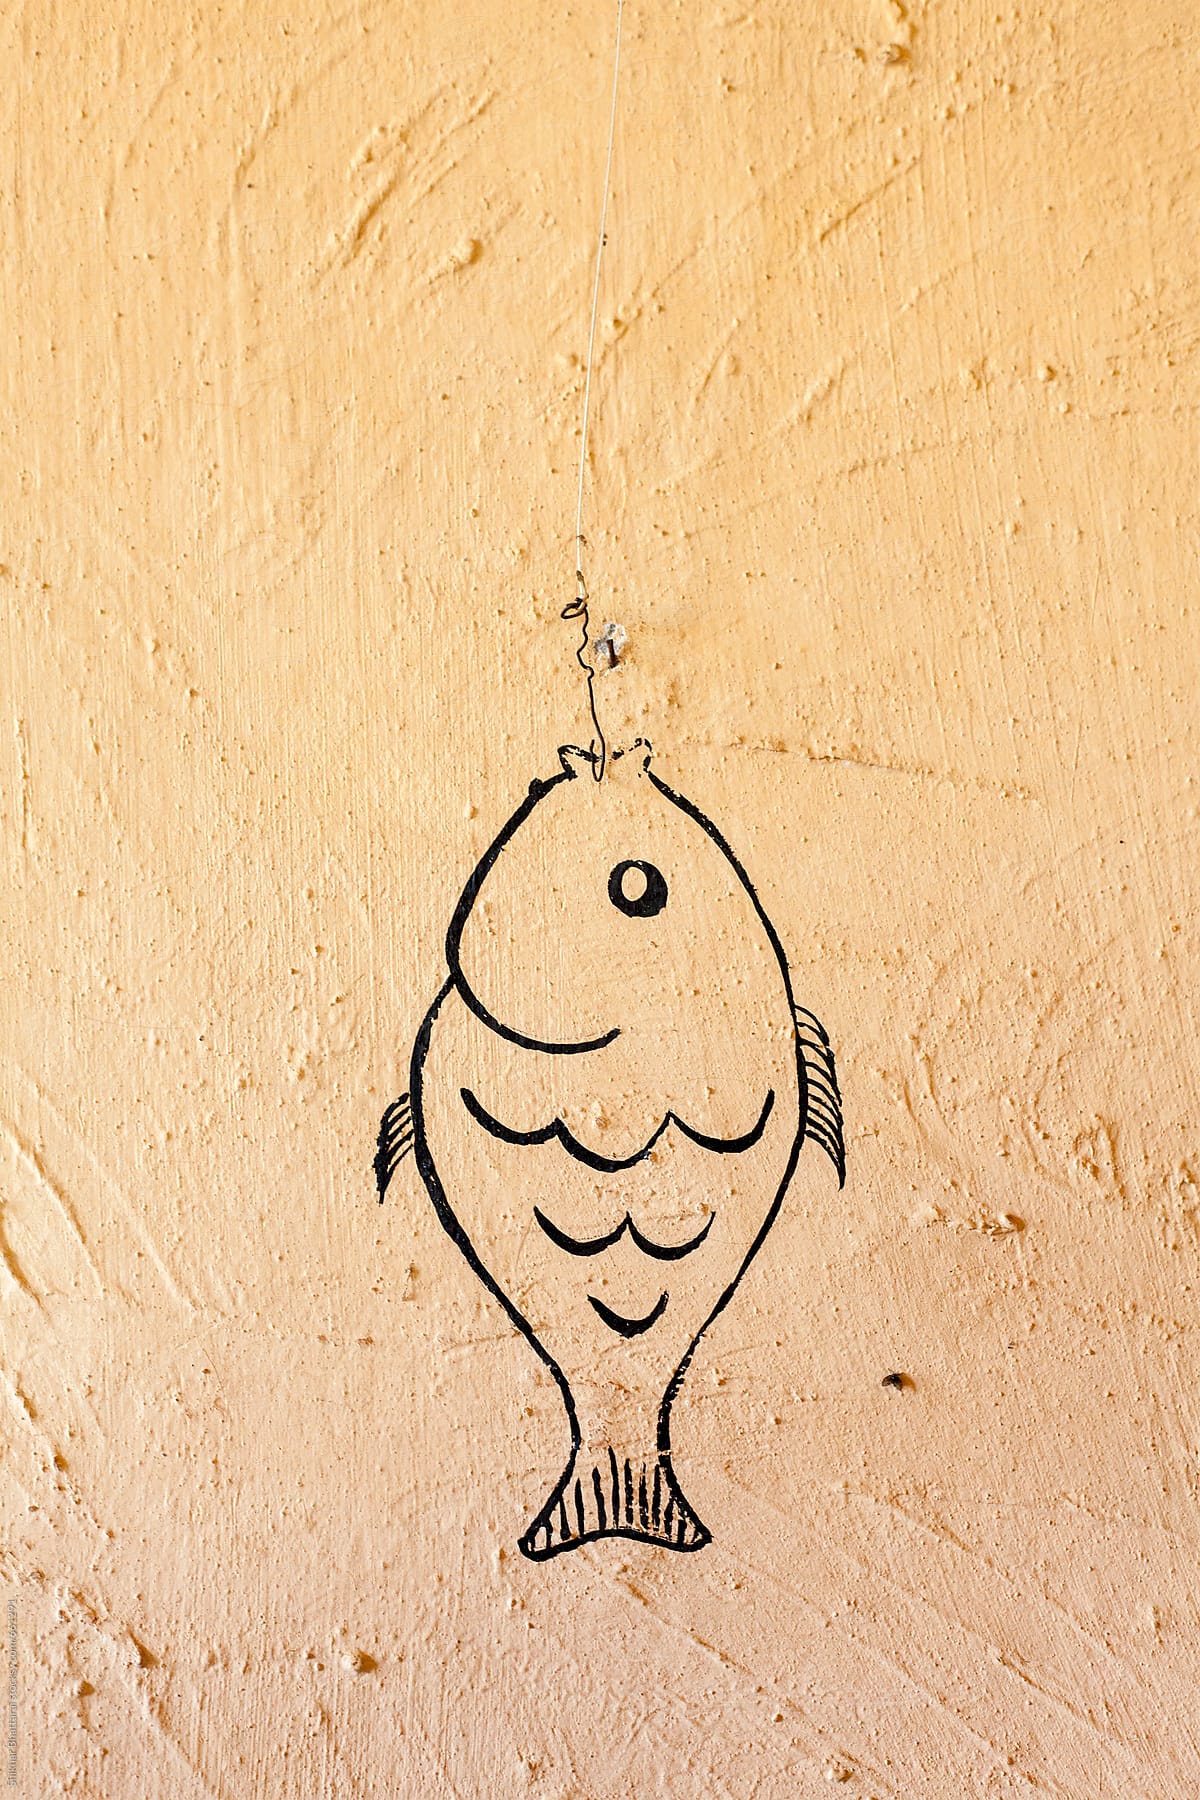 A fish on a hook.